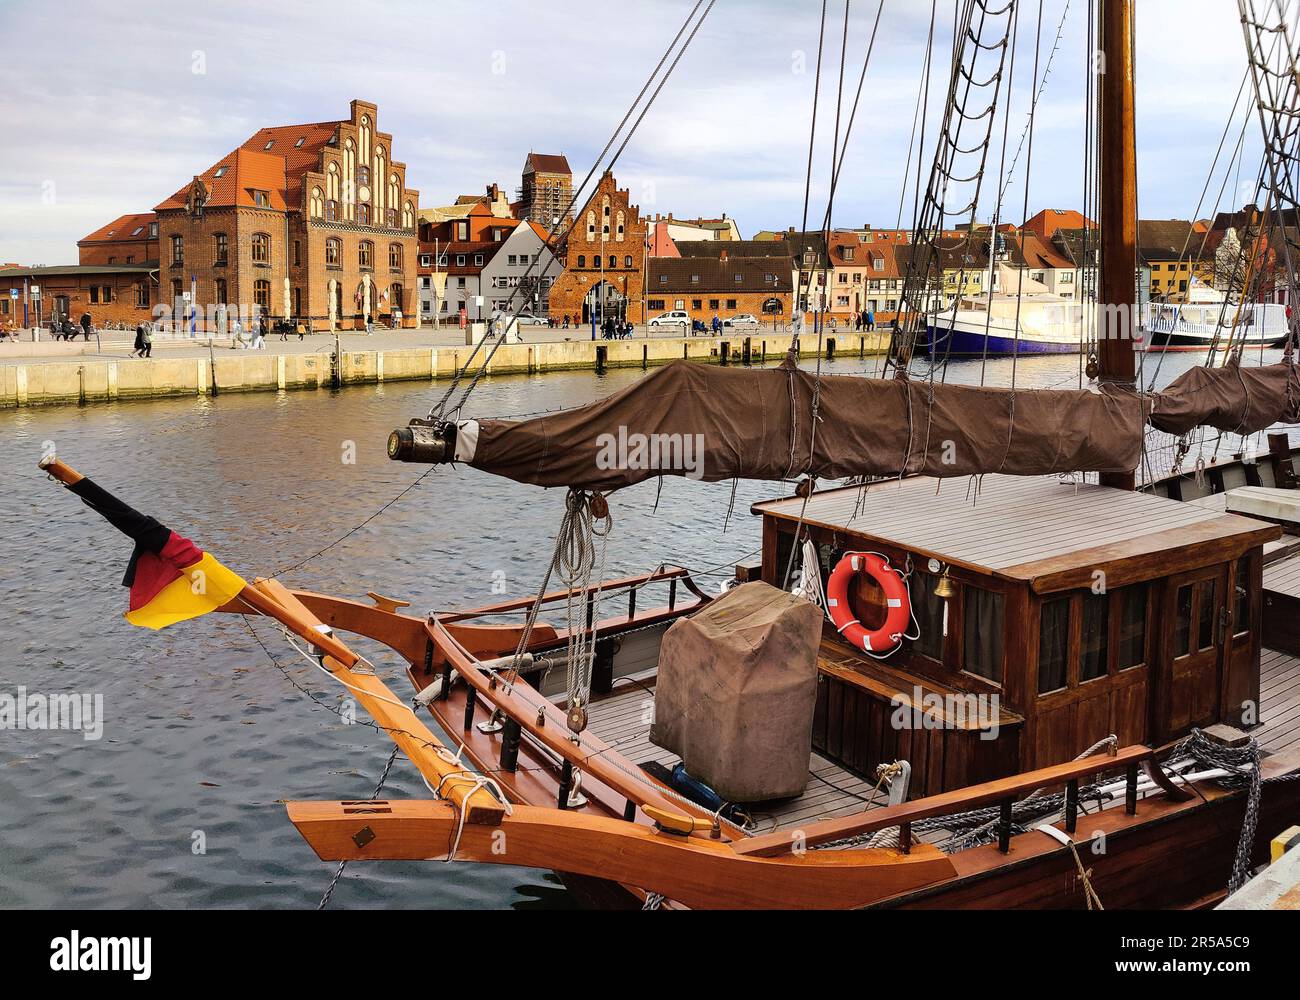 old harbour with the two-masted wooden sailer La-Paloma, Germany, Mecklenburg-Western Pomerania, Wismar Stock Photo